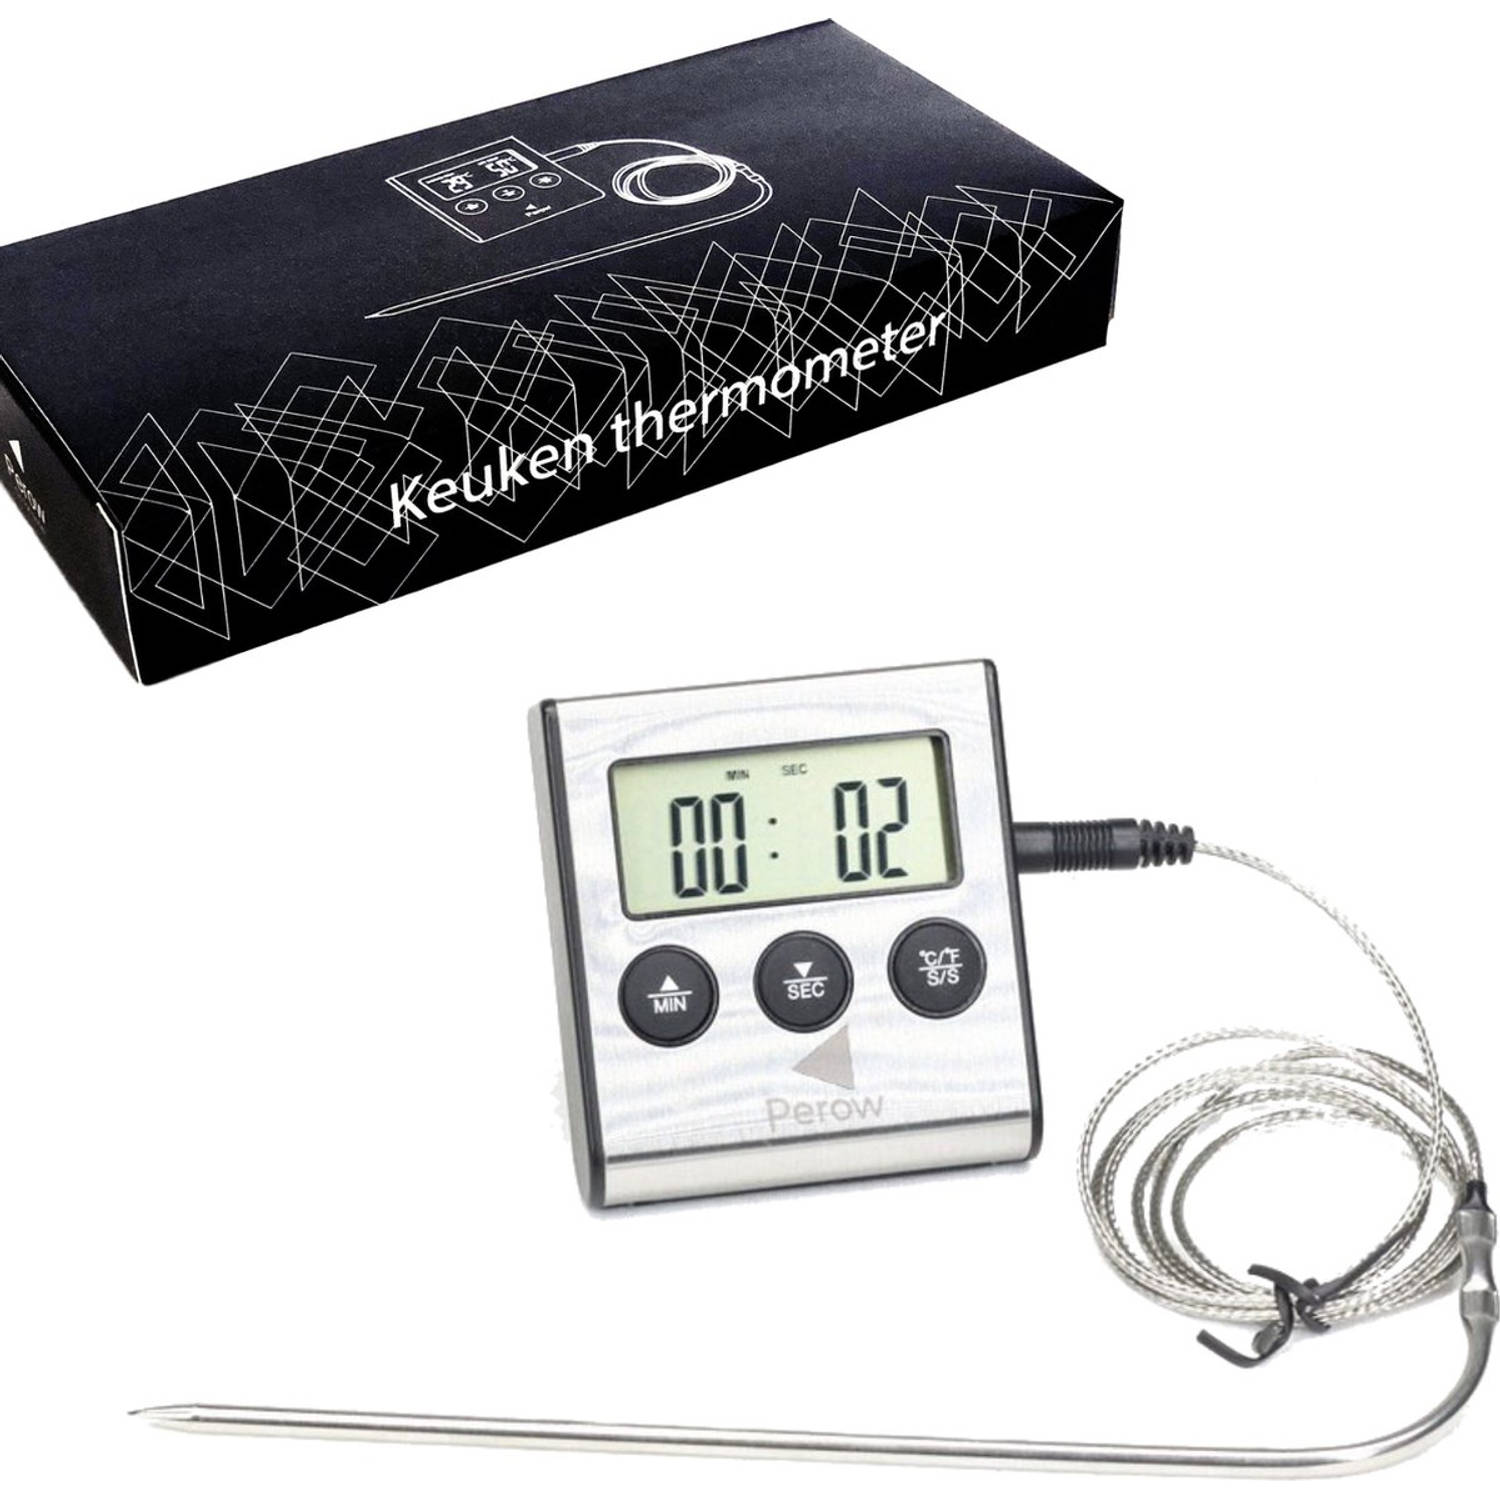 Perow - BBQ Thermometer en Wekker - RVS - Zilver - Suikerthermometer - Voedselthermometer